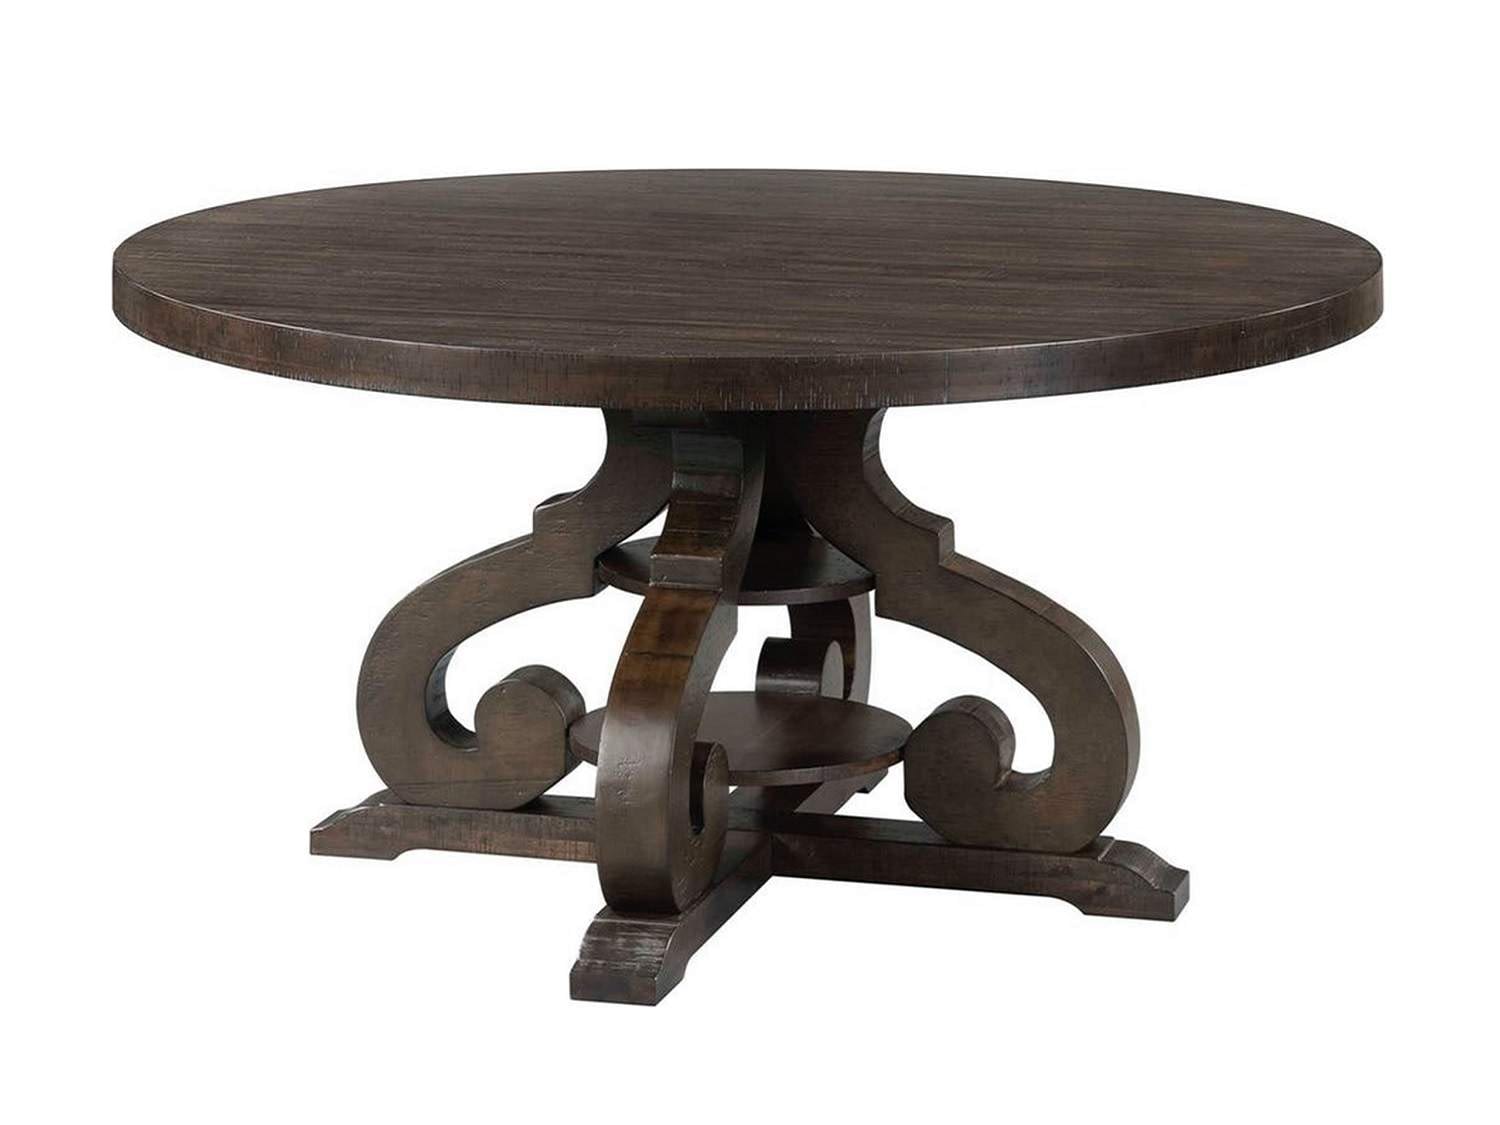 BRIER Dining Table